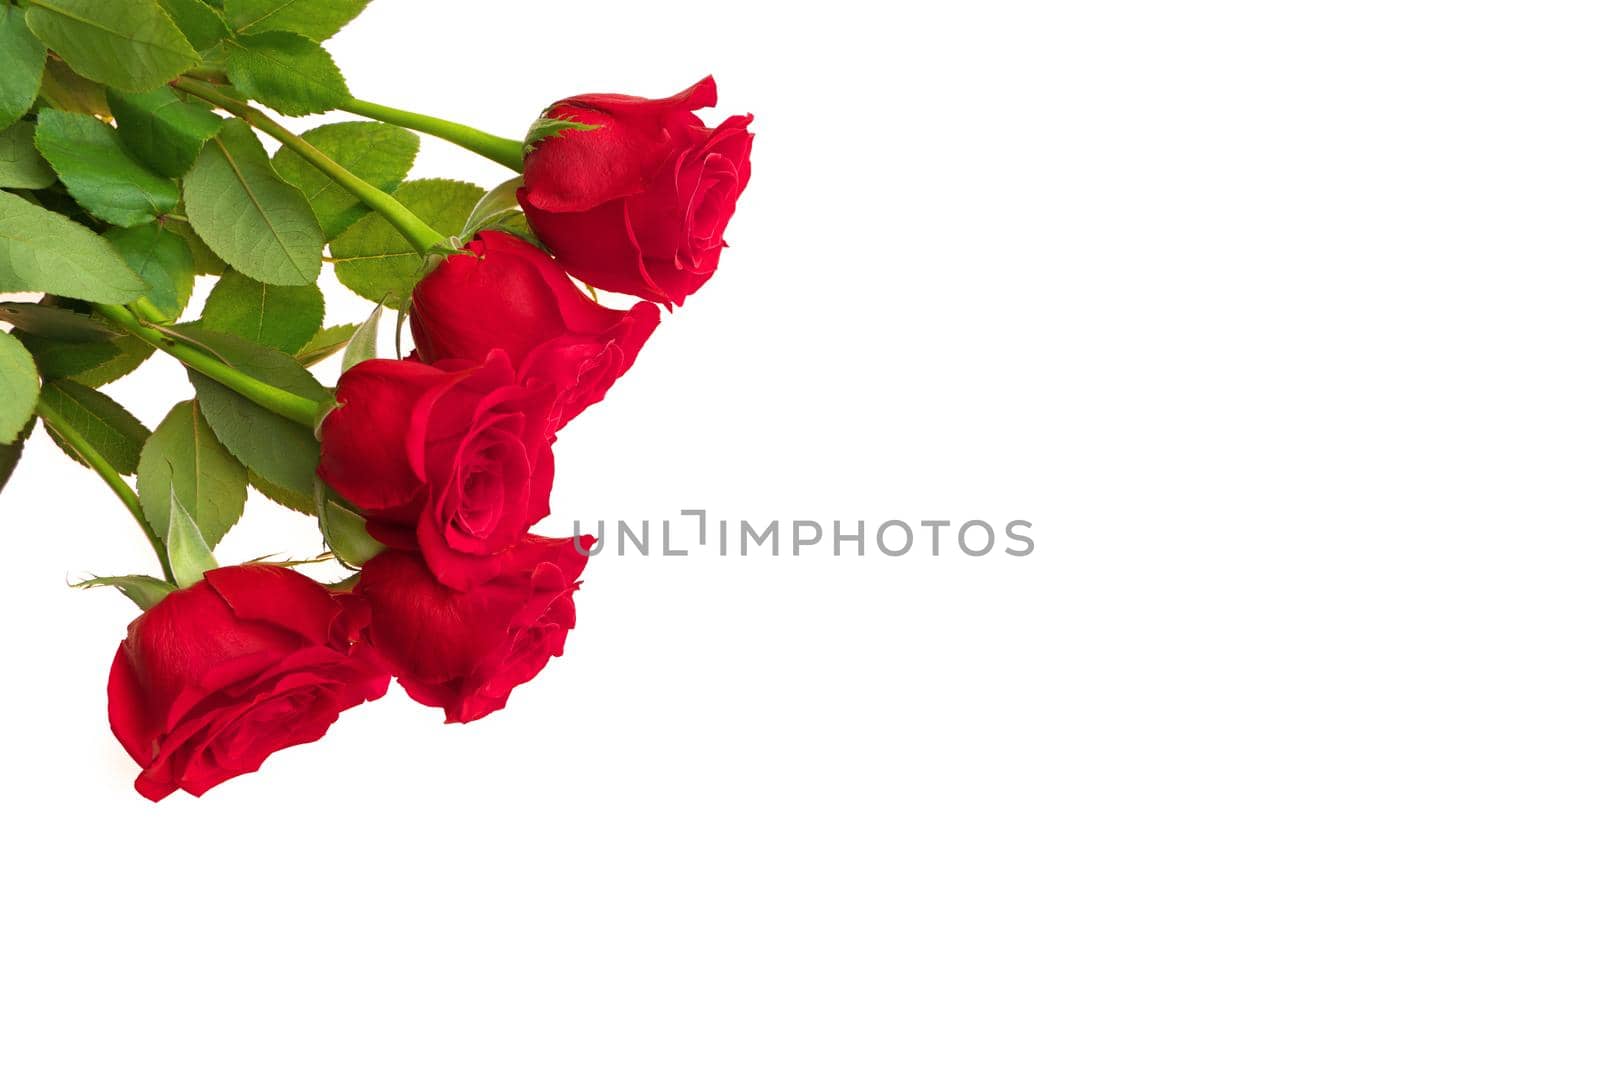 Directly Above Overhead View of Red Rose Bouquet Isolated on a White Background. Copy space right. by markvandam